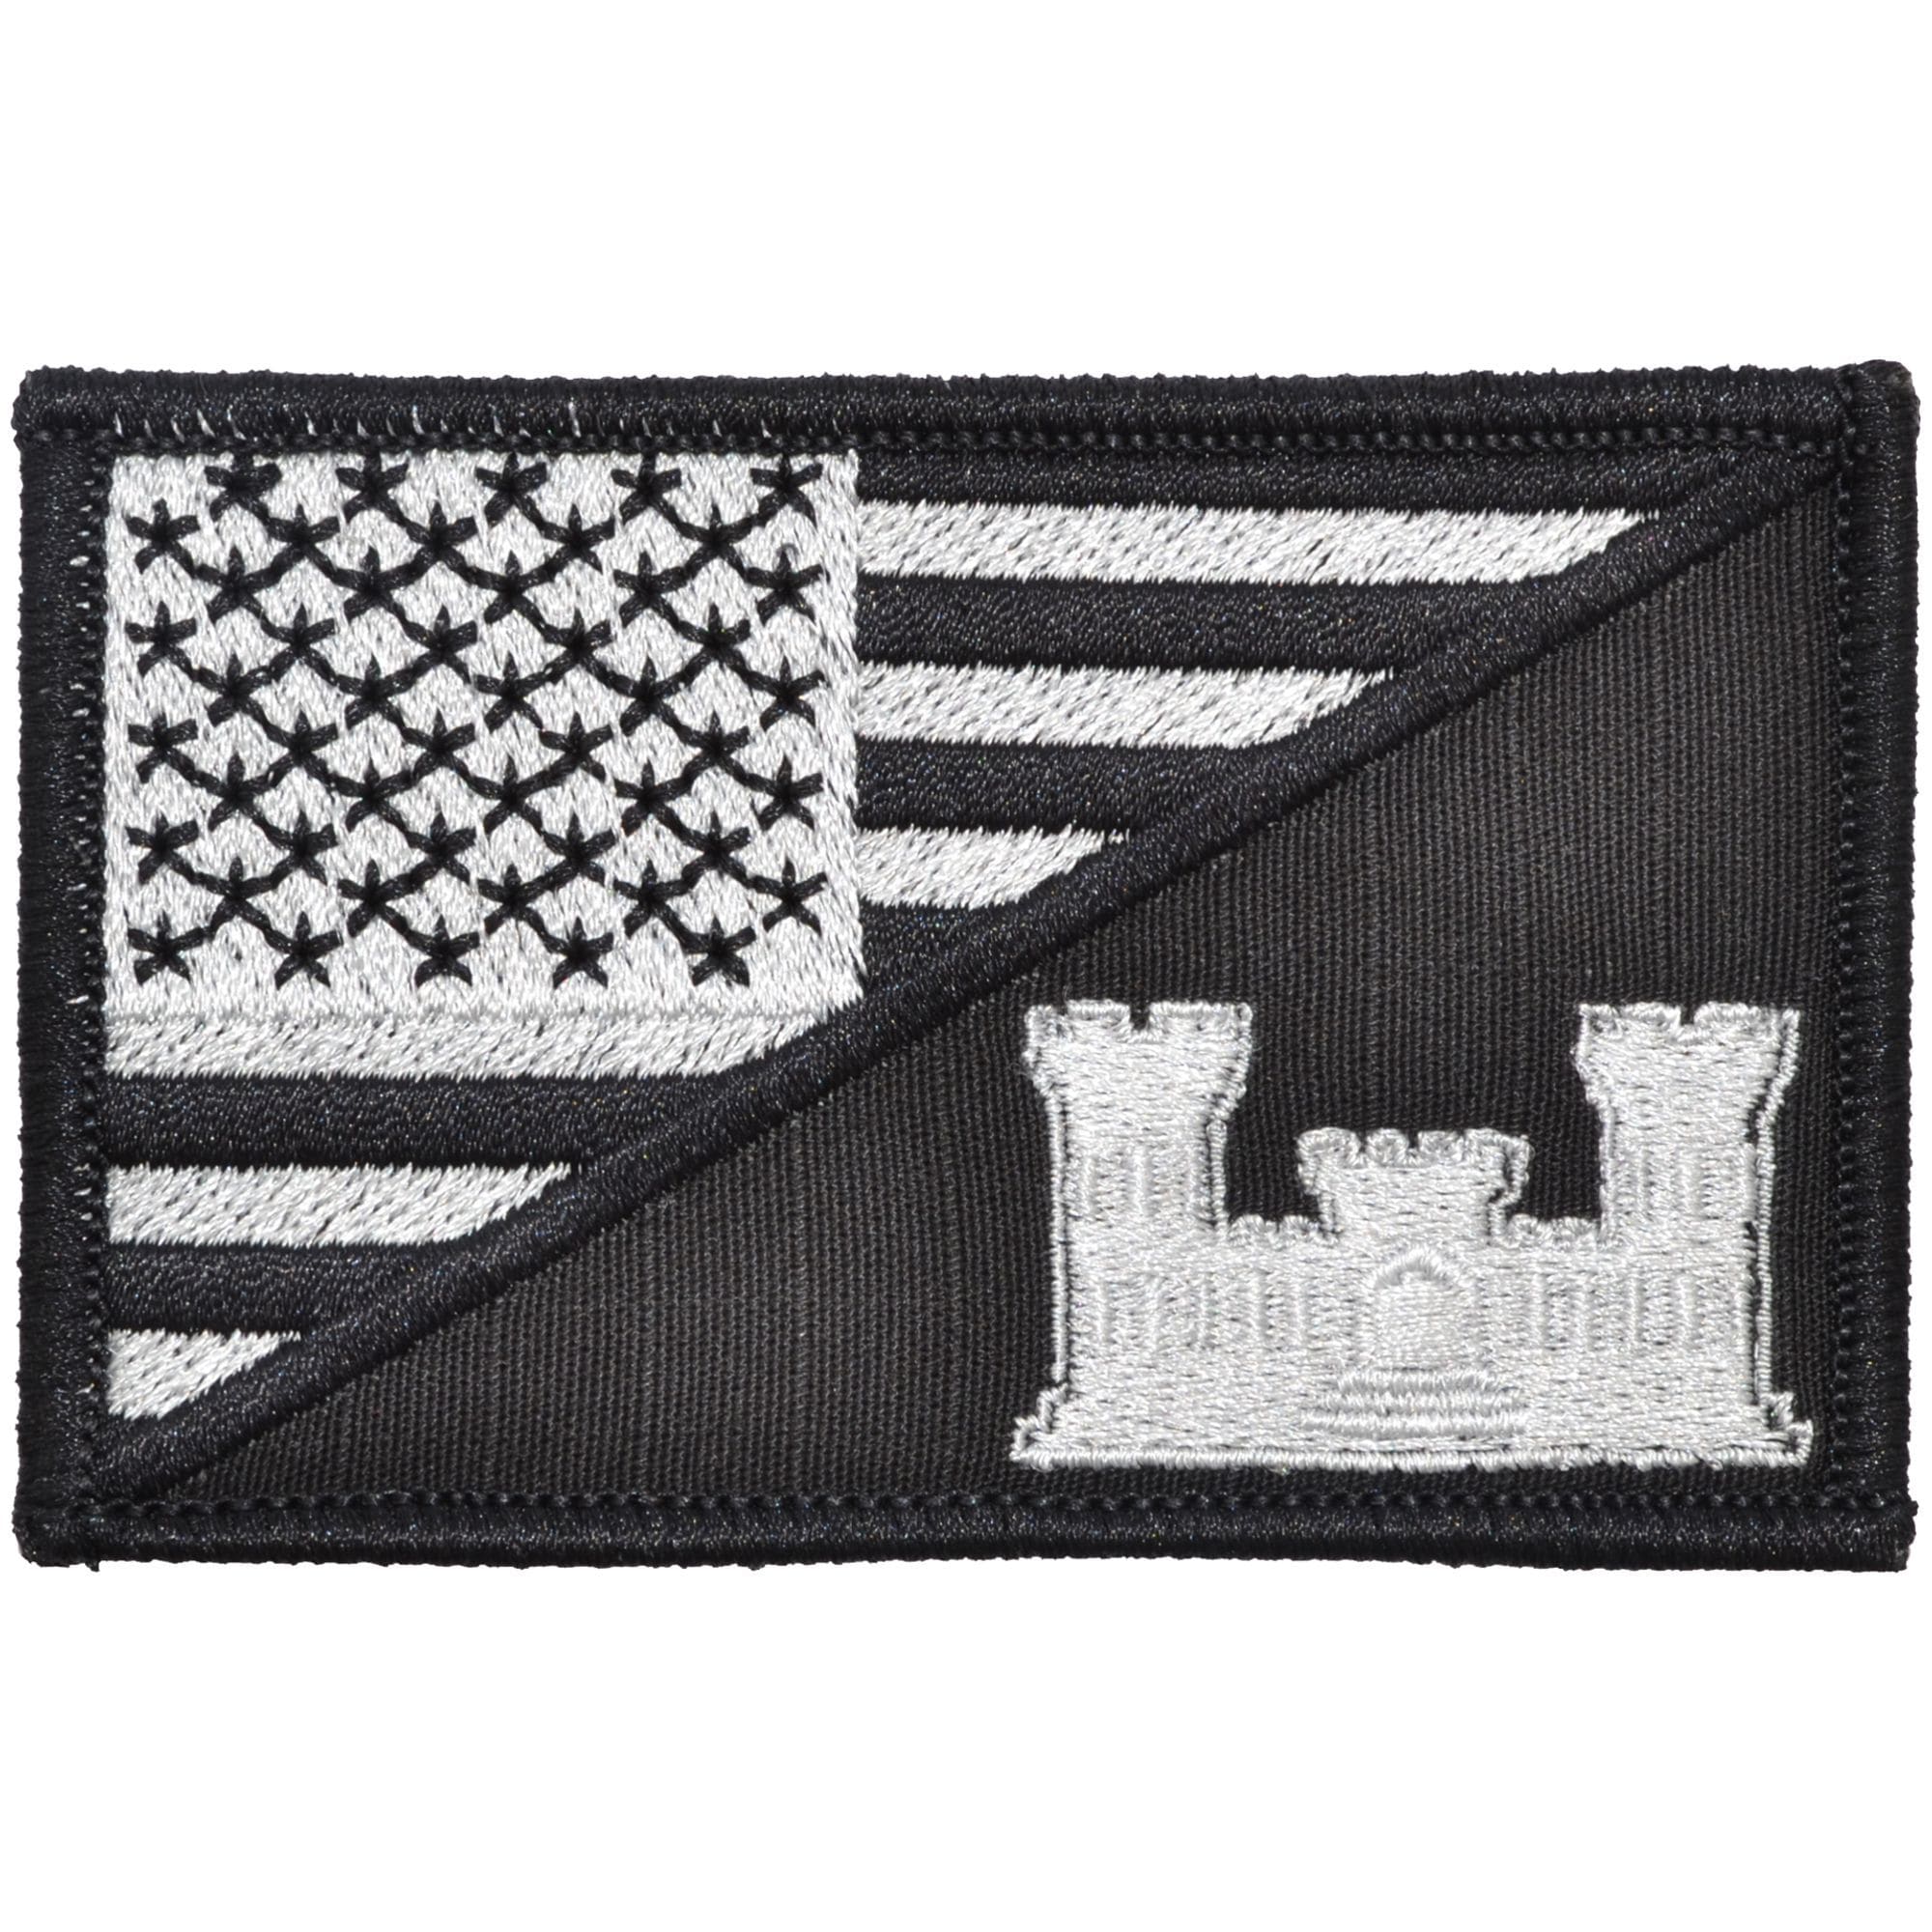 US Waving Flag Patches – Modern Arms